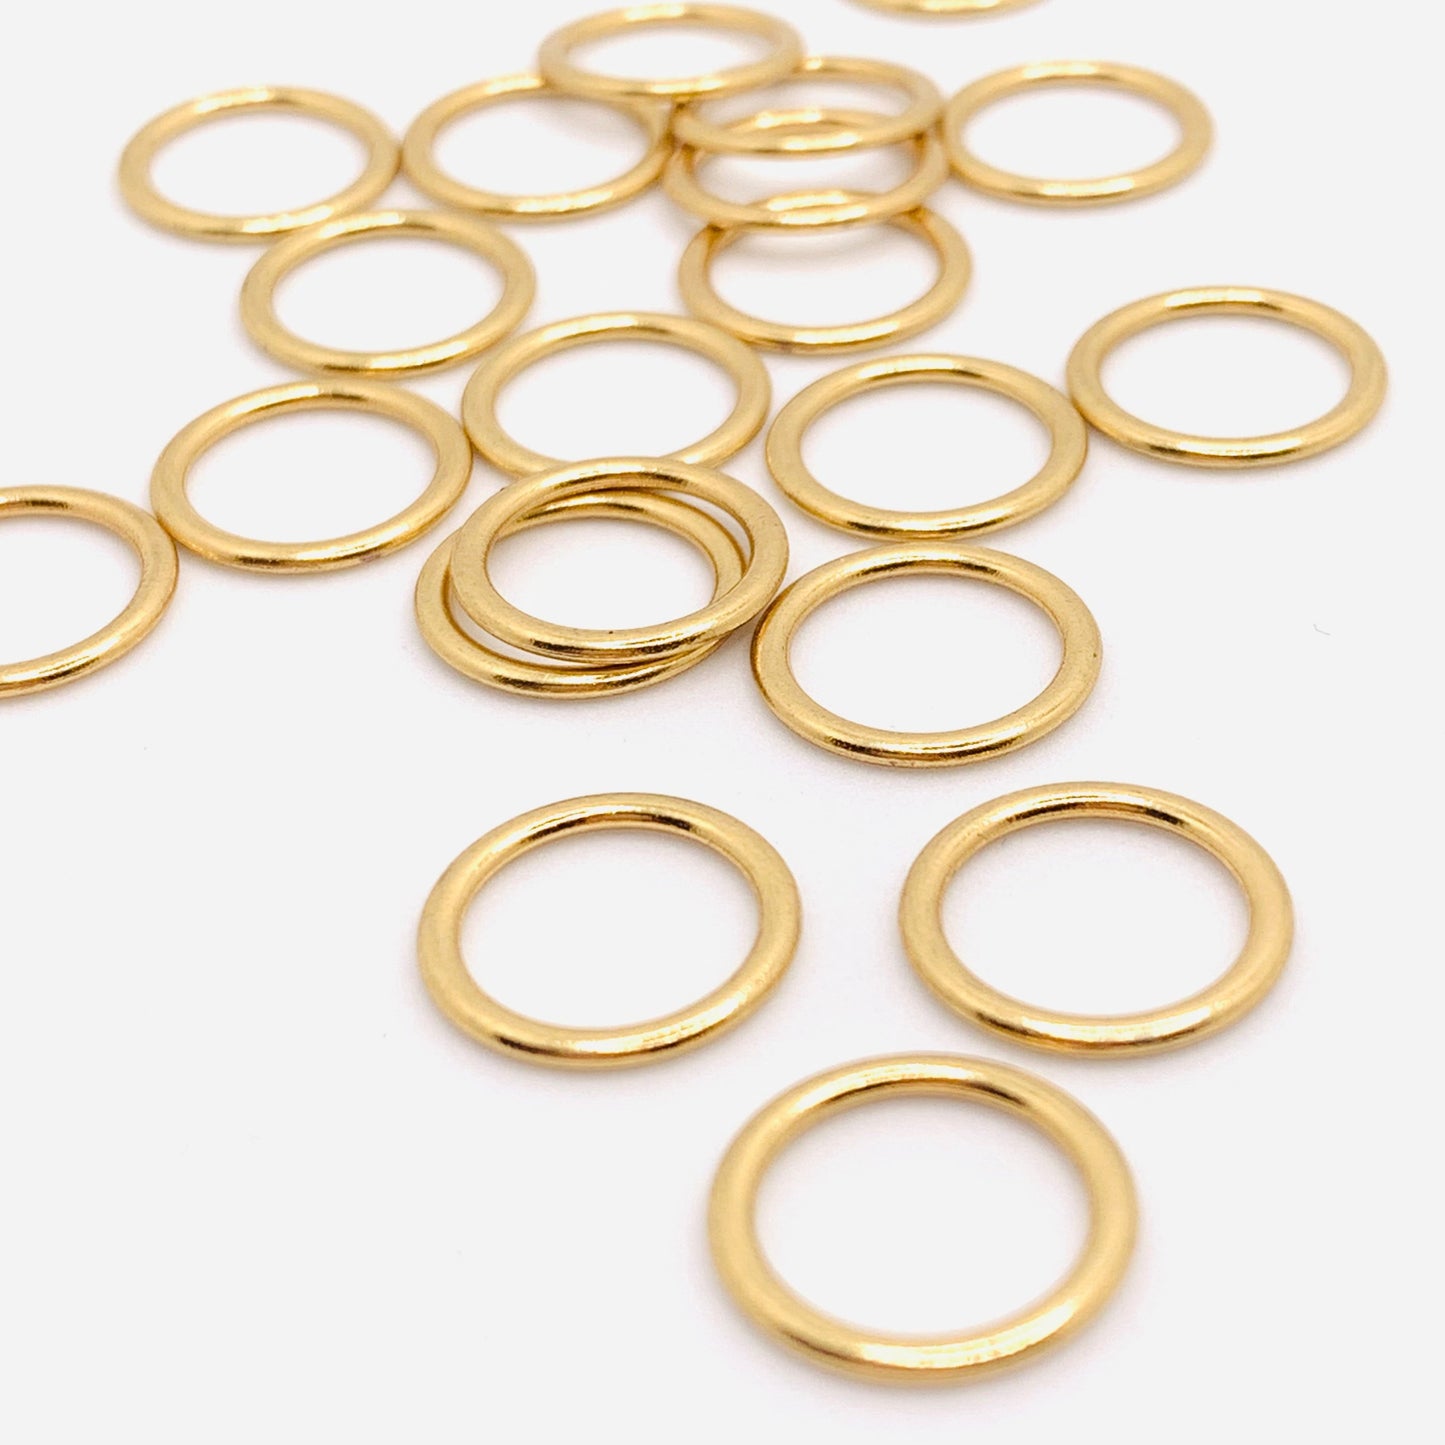 Bulk Buy 100 x 10mm Rings for Bra Making | Gold & Silver Hardware | Discounted price